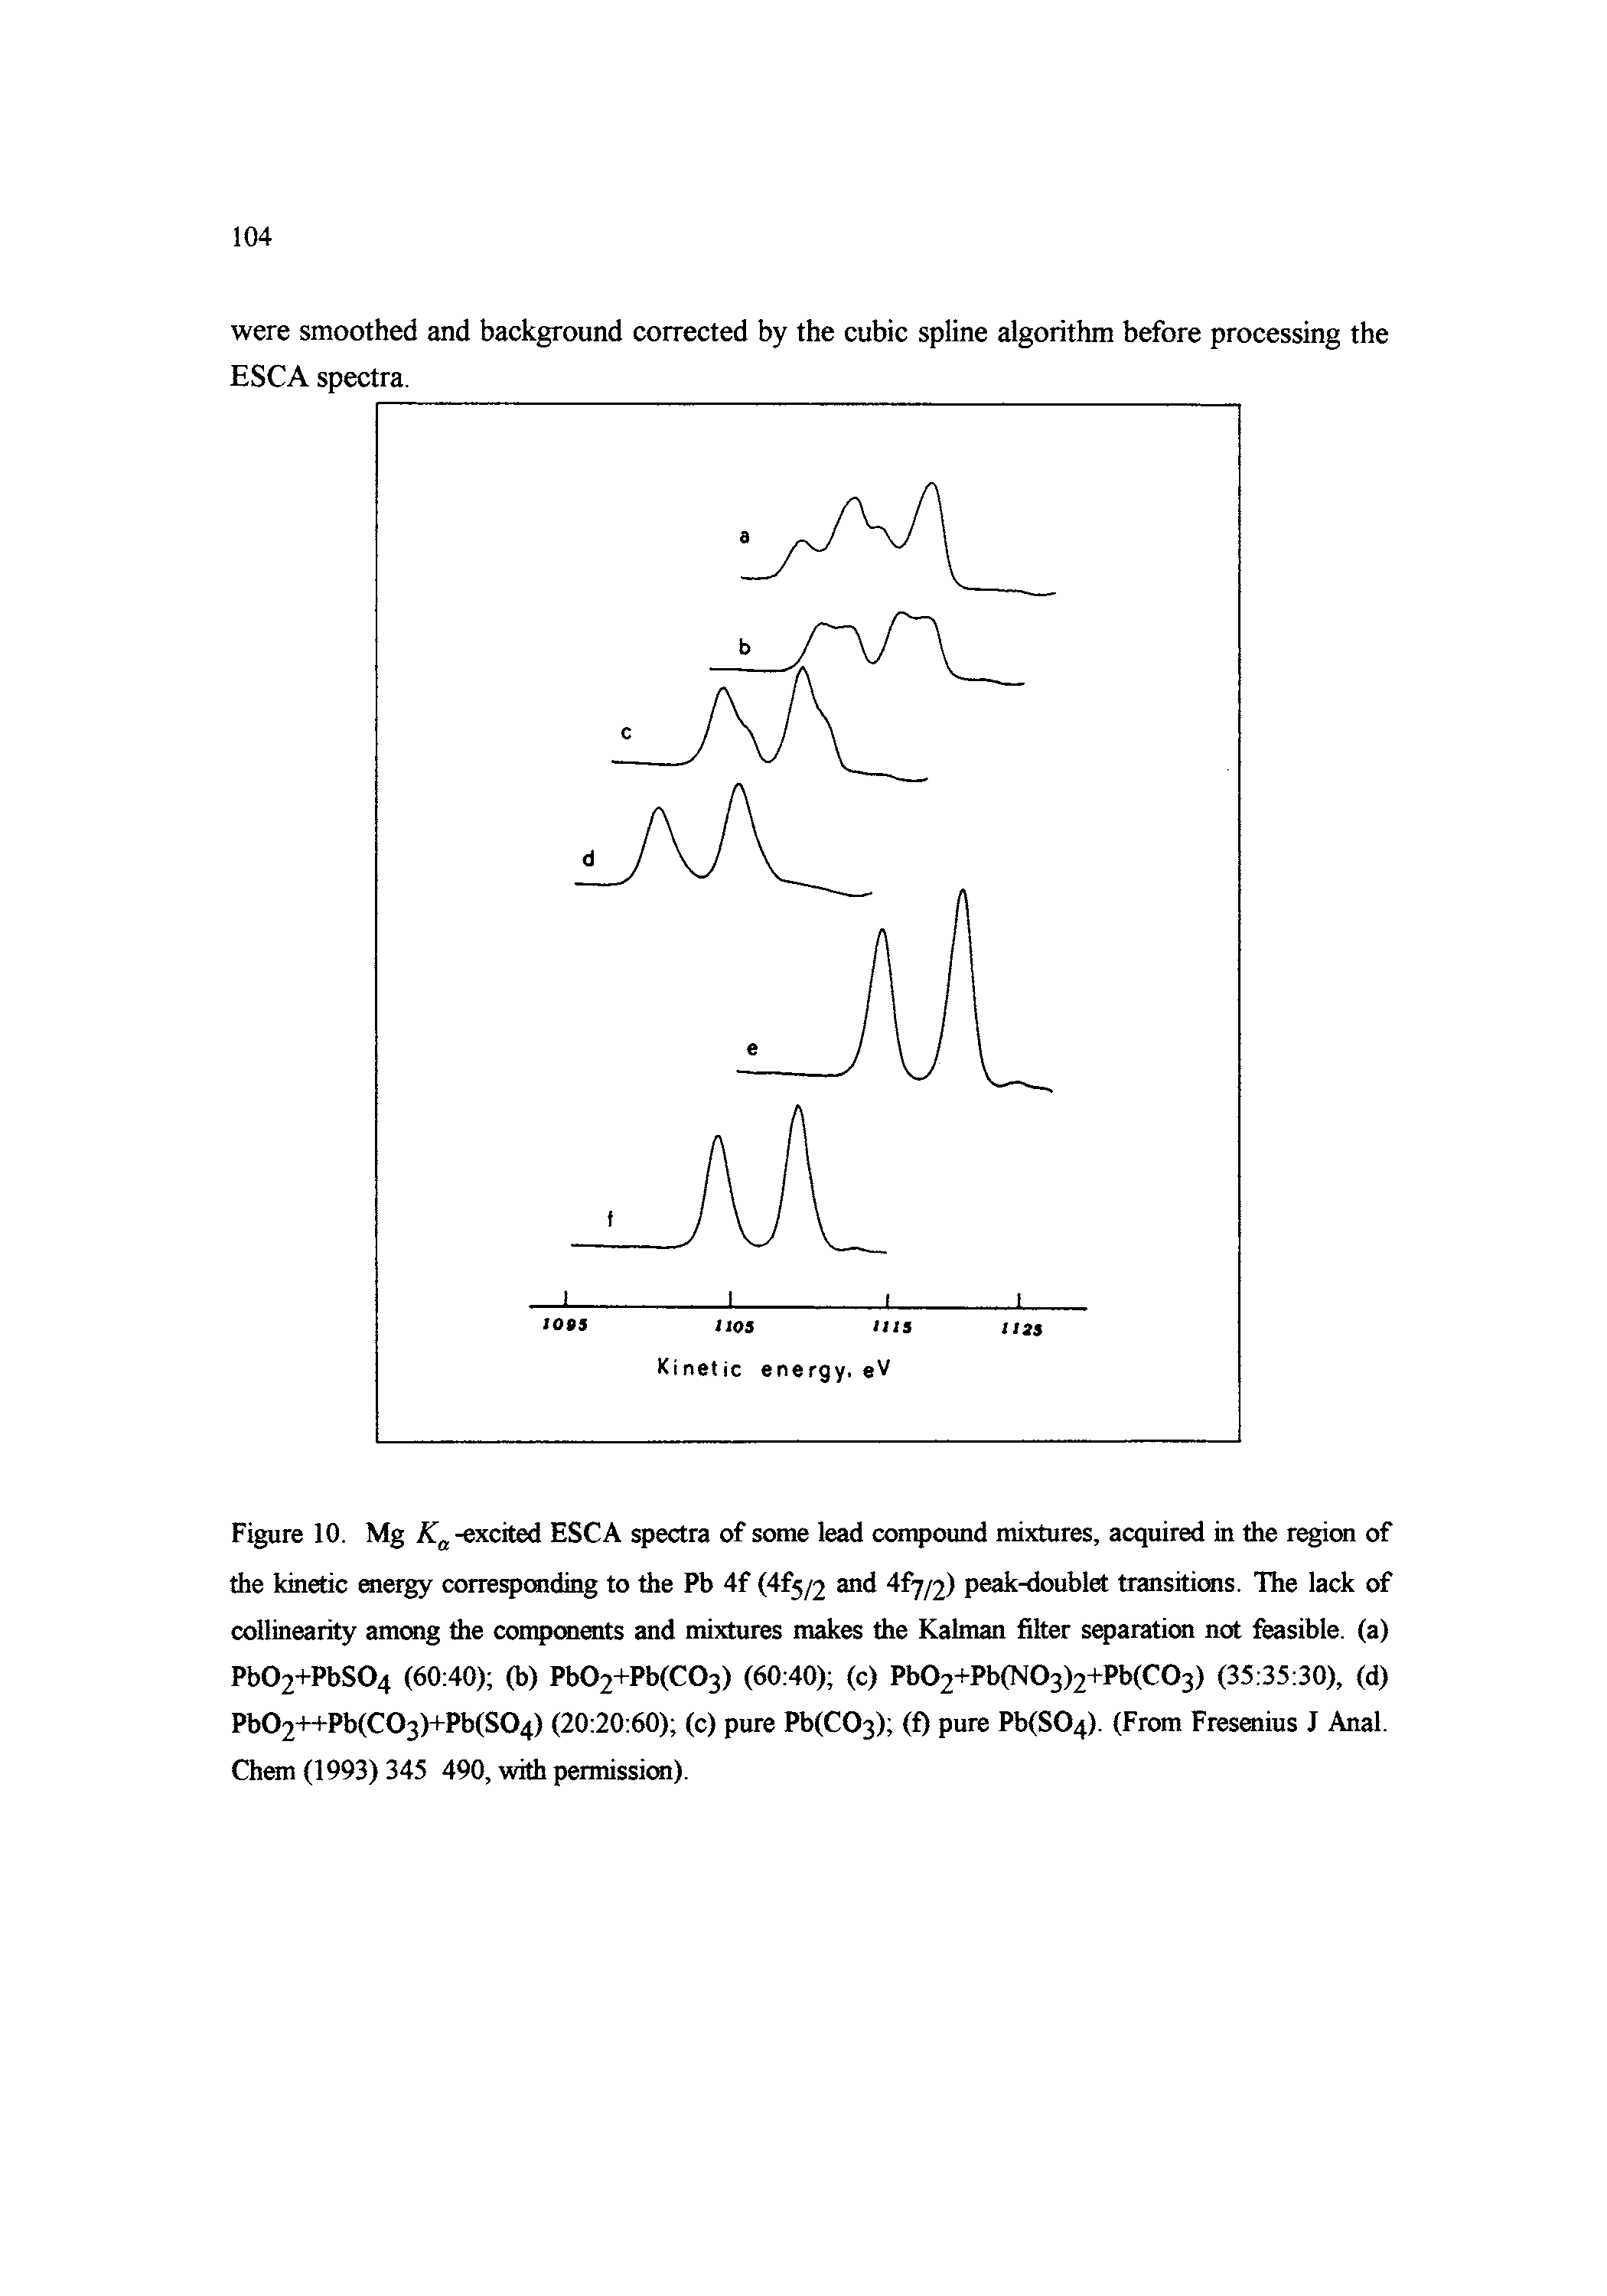 Figure 10. Mg -excited ESCA spectra of some lead compound mixtures, acquired in the region of the kinetic energy corresponding to the Pb 4f (4f5/2 and 4f7/2> peak-doublet transitions. The lack of collinearity among the compcsients and mixtures makes the Kalman filter separation not feasible, (a) Pb02+PbS04 (60 40) (b) Pb02+Pb(C03> (60 40) (c) Pb02+Pb(N03)2+Pb(C03) (35 35 30), (d) Pb02++Pb(C03)+Pb(S04) (20 20 60) (c) pure Pb(C03) (f) pure Pb(S04). (From Fresenius J Anal. Chem (1993) 345 490, with permissirai).